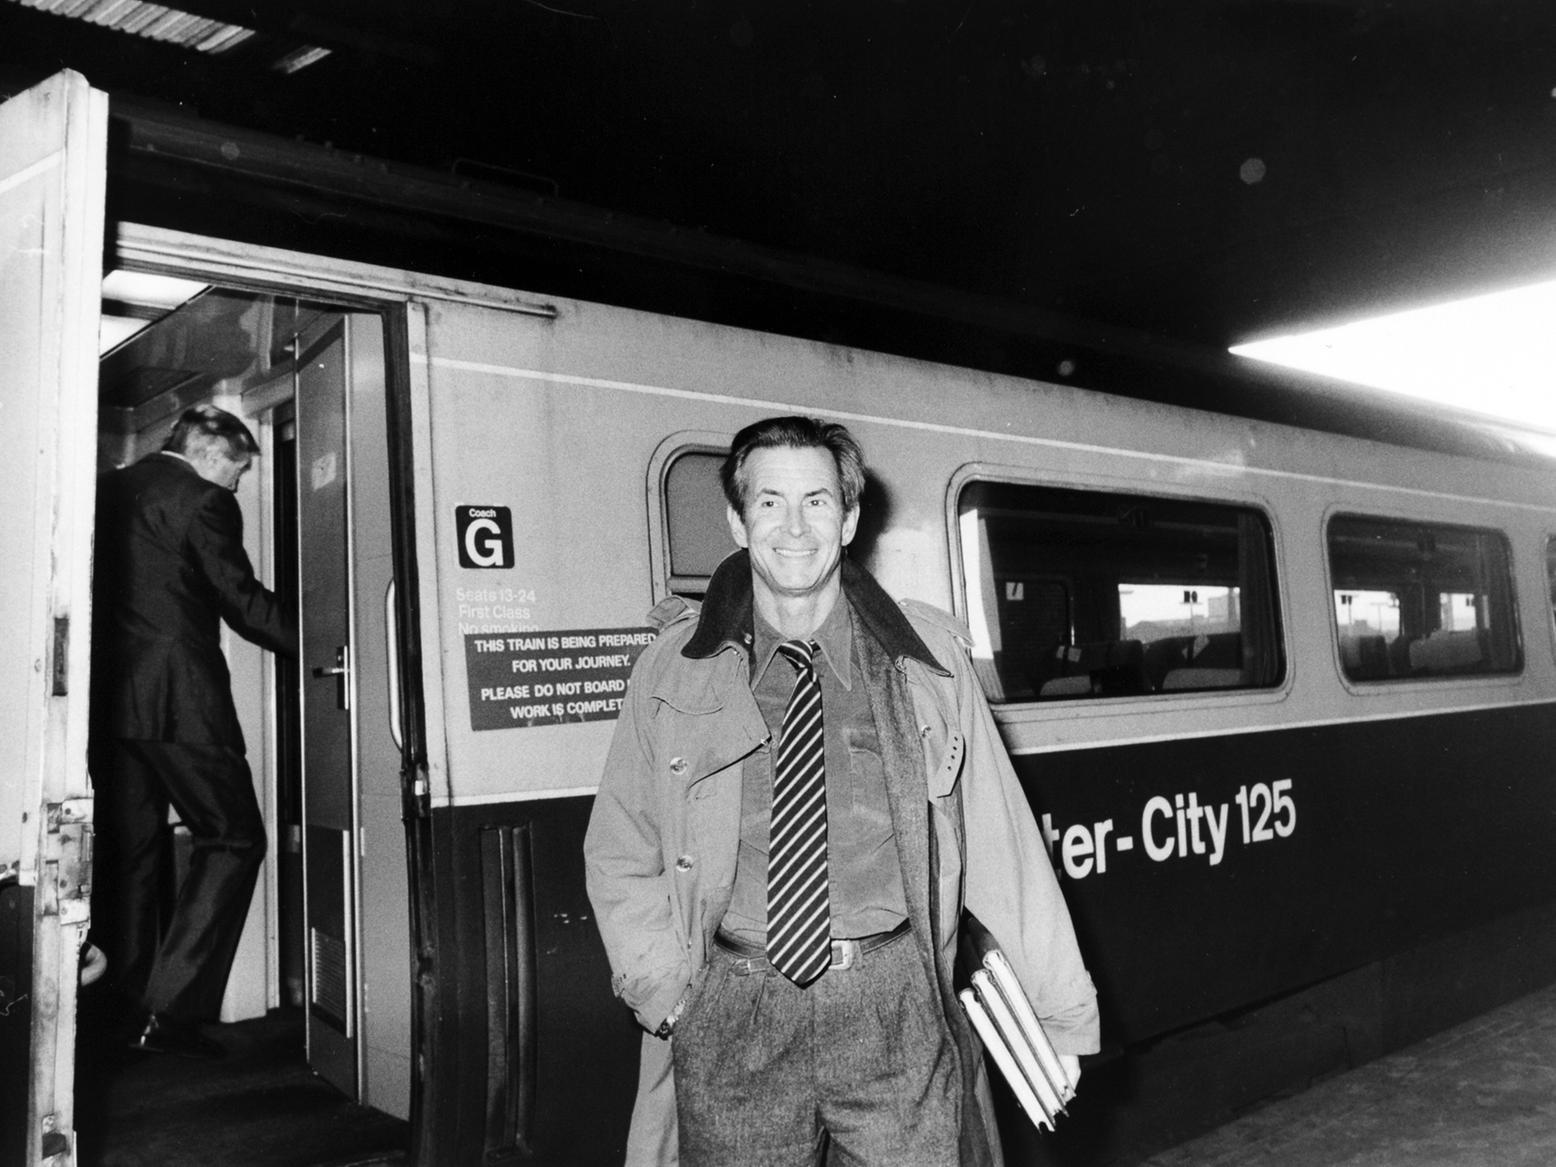 Recognise this actor arriving at Leeds City Station? It's Anthony Perkins, best known for his role in Hitchcock thriller Psycho.